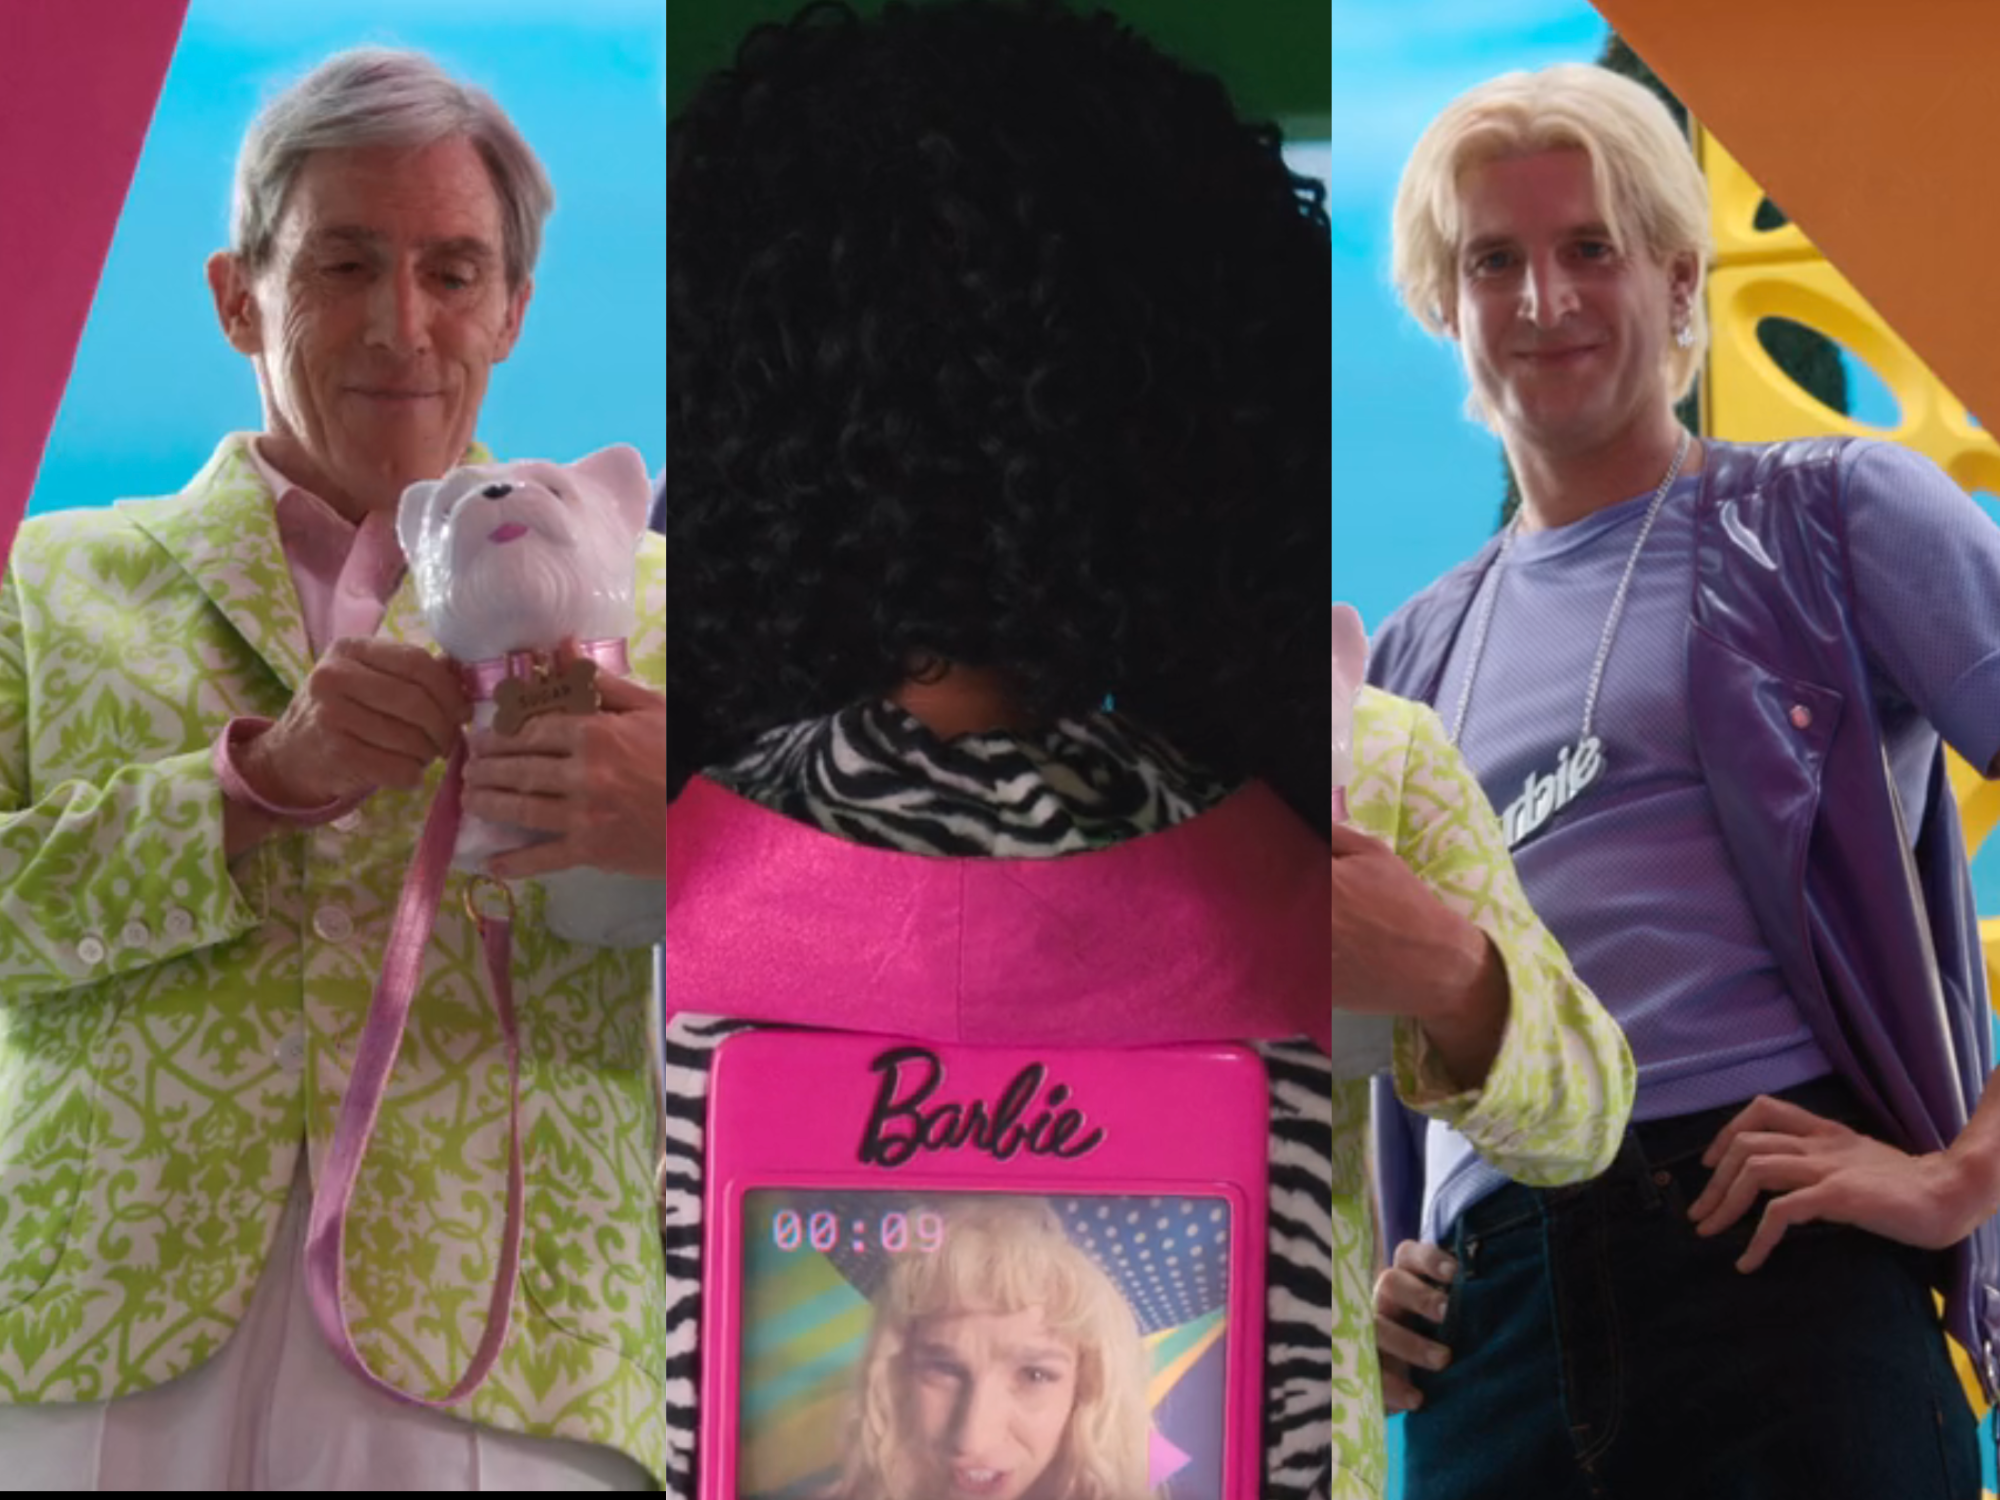 left: sugar daddy ken in a green suit holding a toy dog; center: video girl barbie from the bafck, with a video screen embedded in her back; right: earring magic ken, a guy with blonde hair and a vest